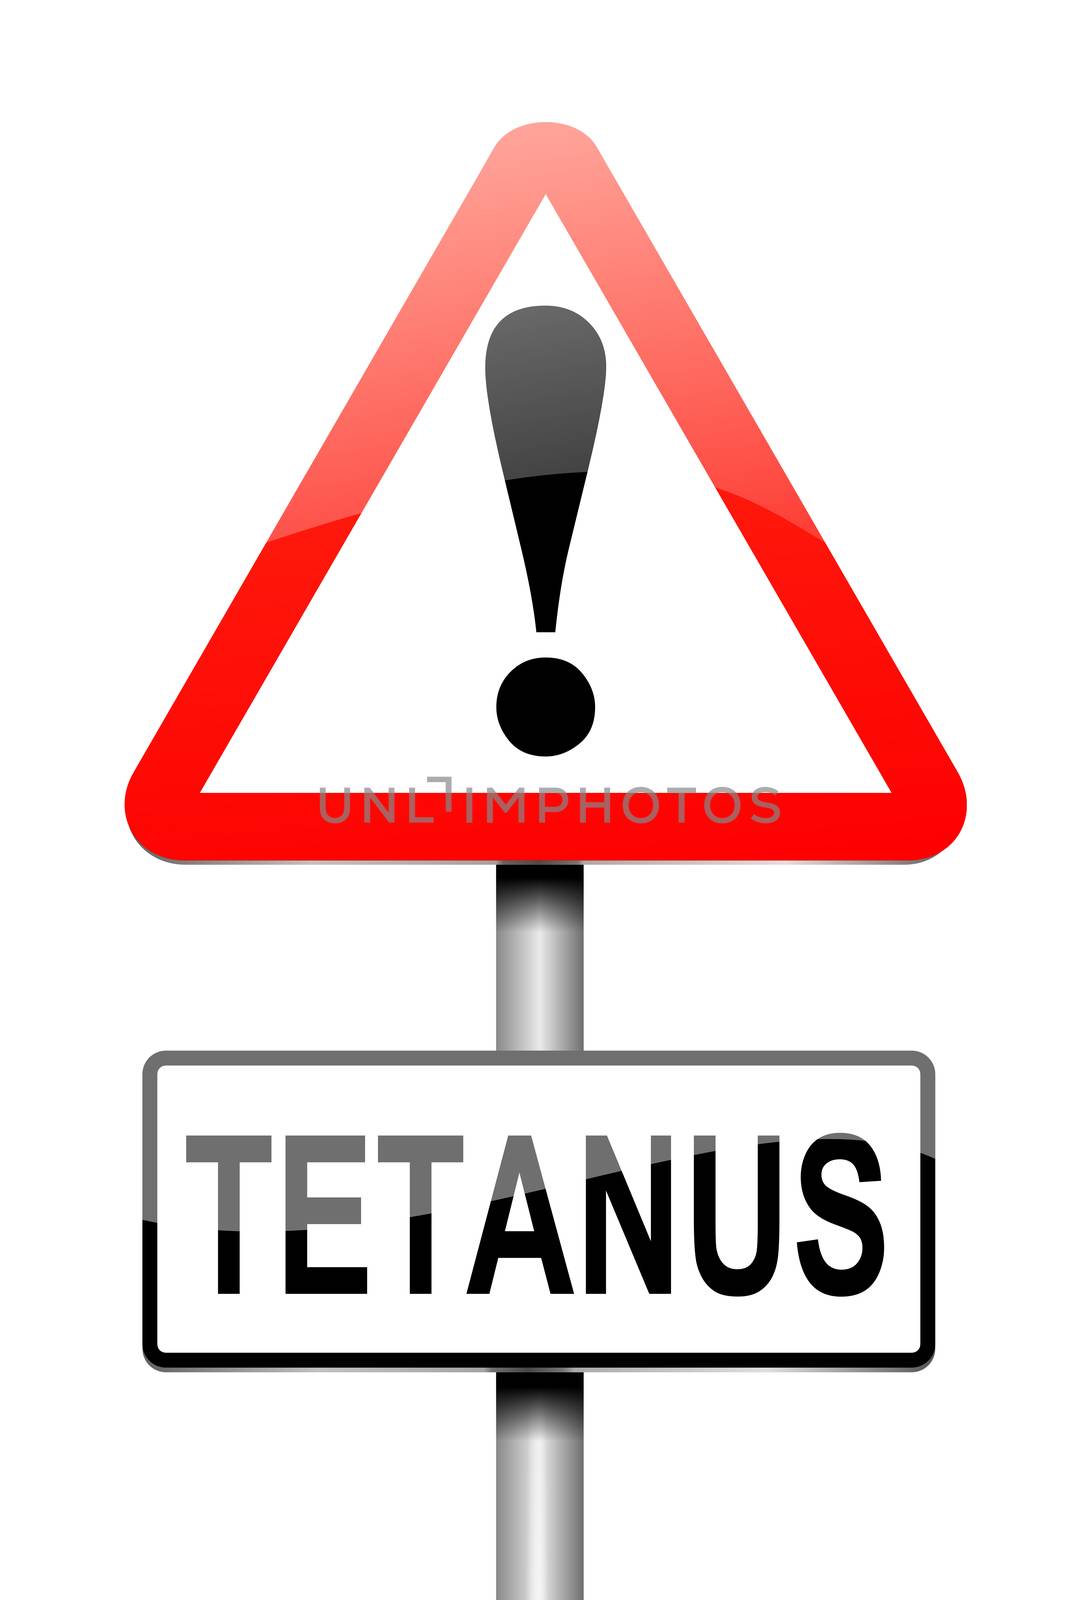 Illustration depicting a sign with a Tetanus concept.